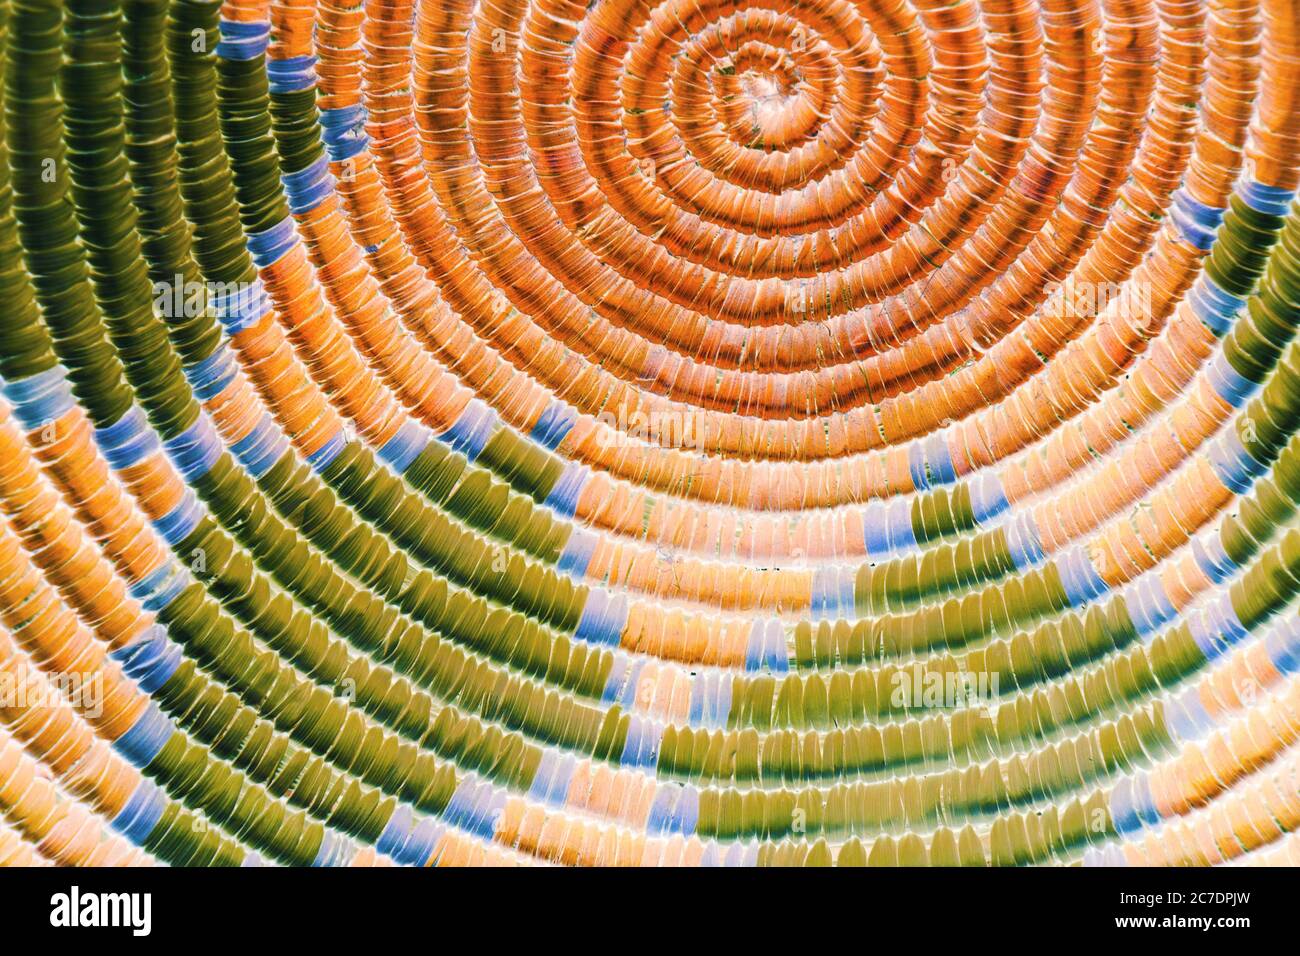 Close up photo of a circular orange and green Native American Indian basket.  The weave has a southwestern design and nice textures. Stock Photo